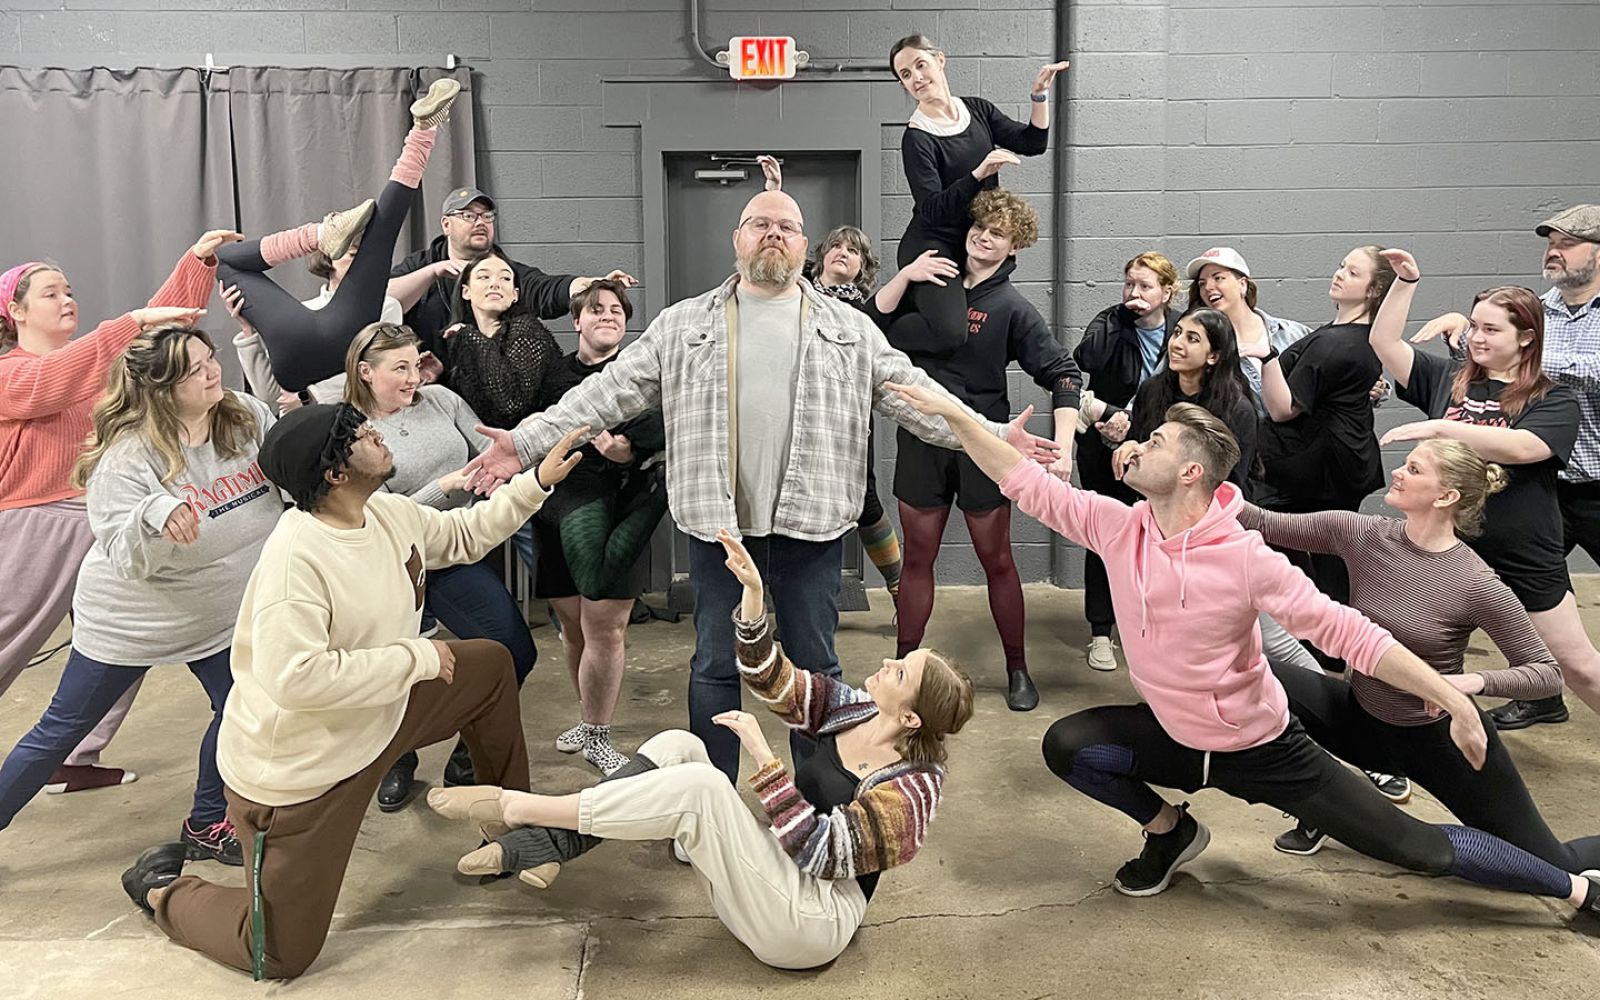 Three Rivers Music Theatre and Fort Wayne Dance Collective have come together to present Cats at the University of Saint Francis’ Robert Goldstine Performing Arts Center, opening March 2.